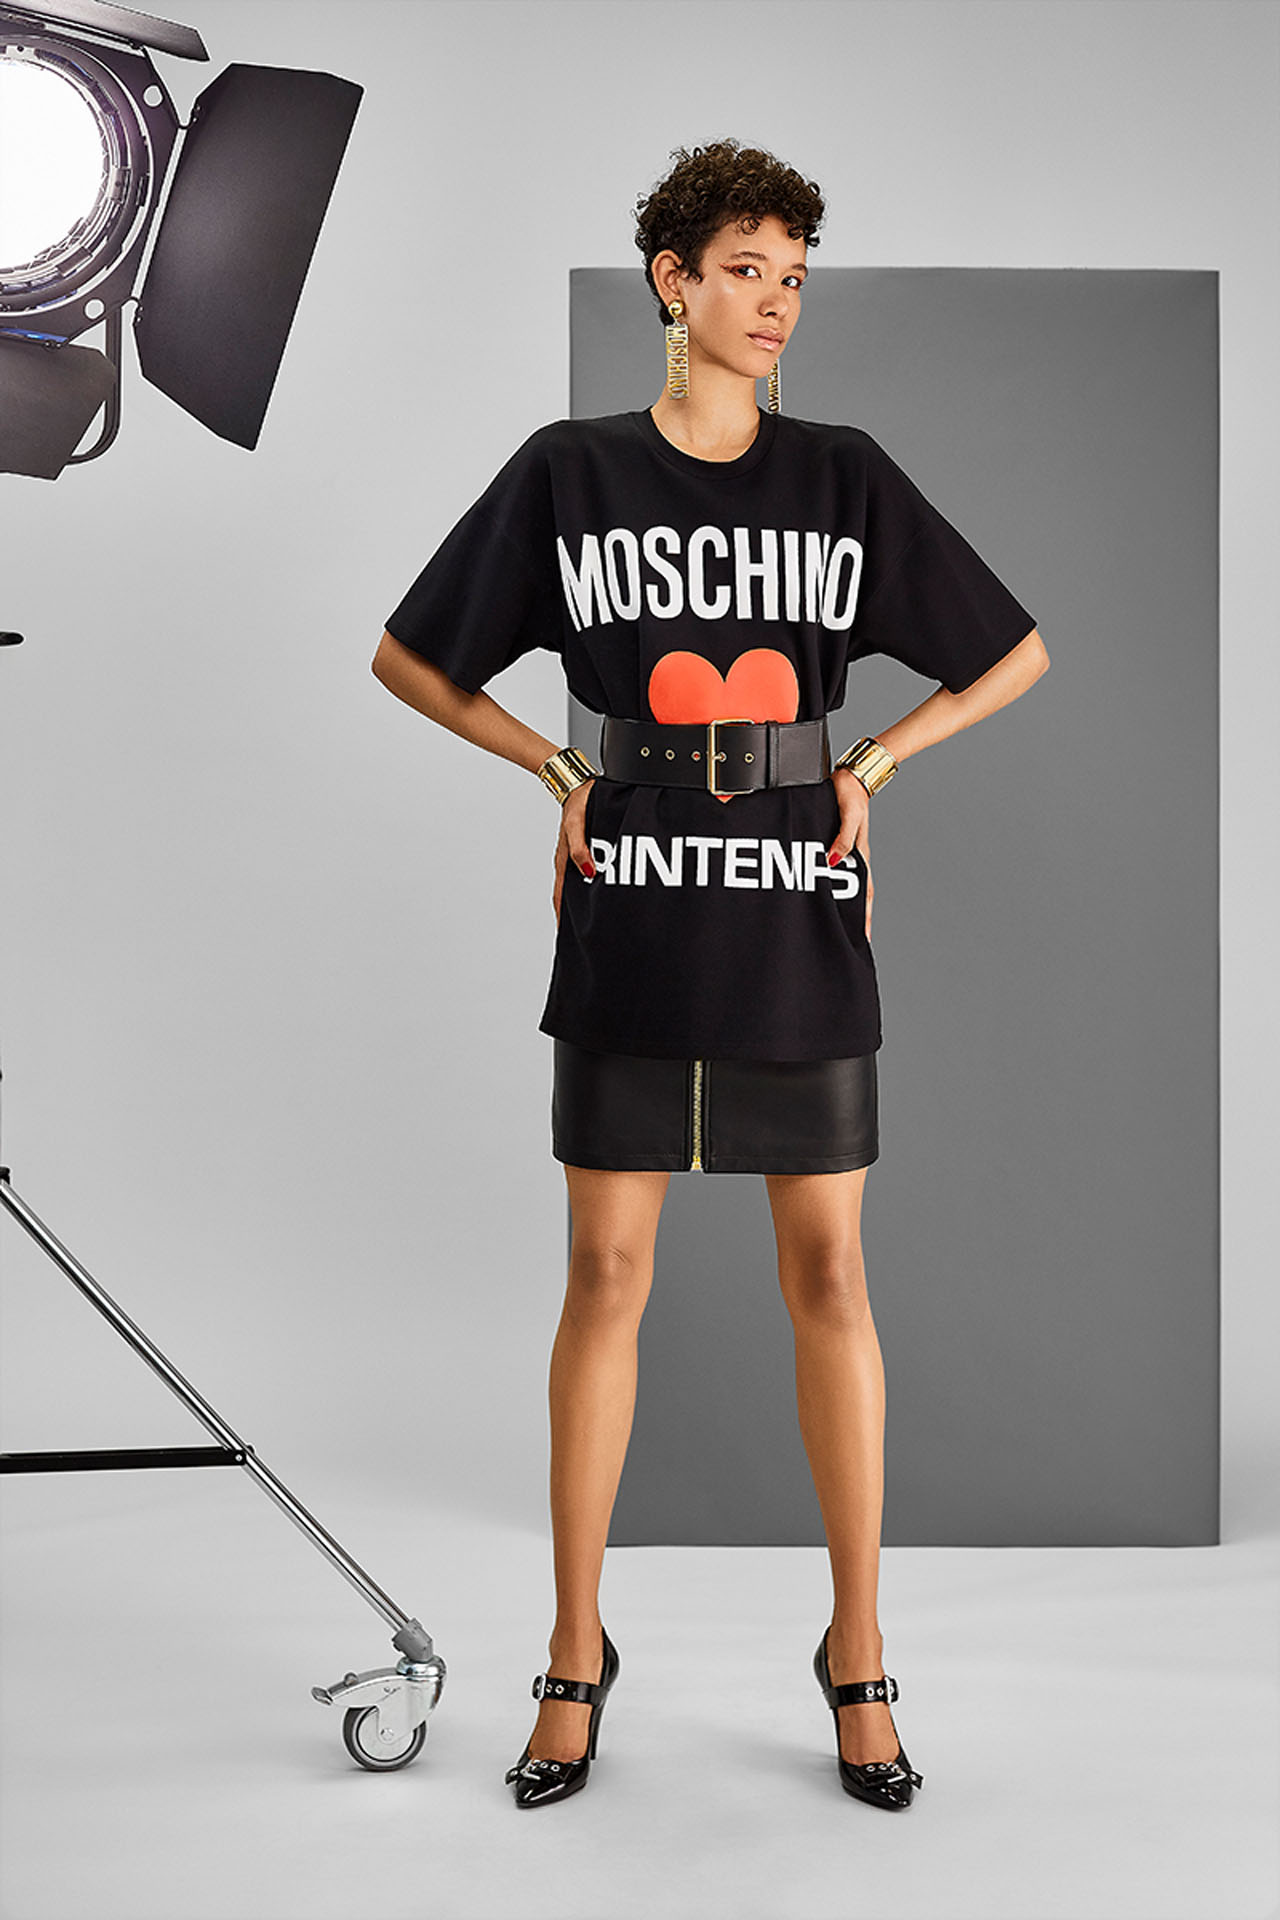 Dilone for Moschino Printemps 2018 by David Hatters